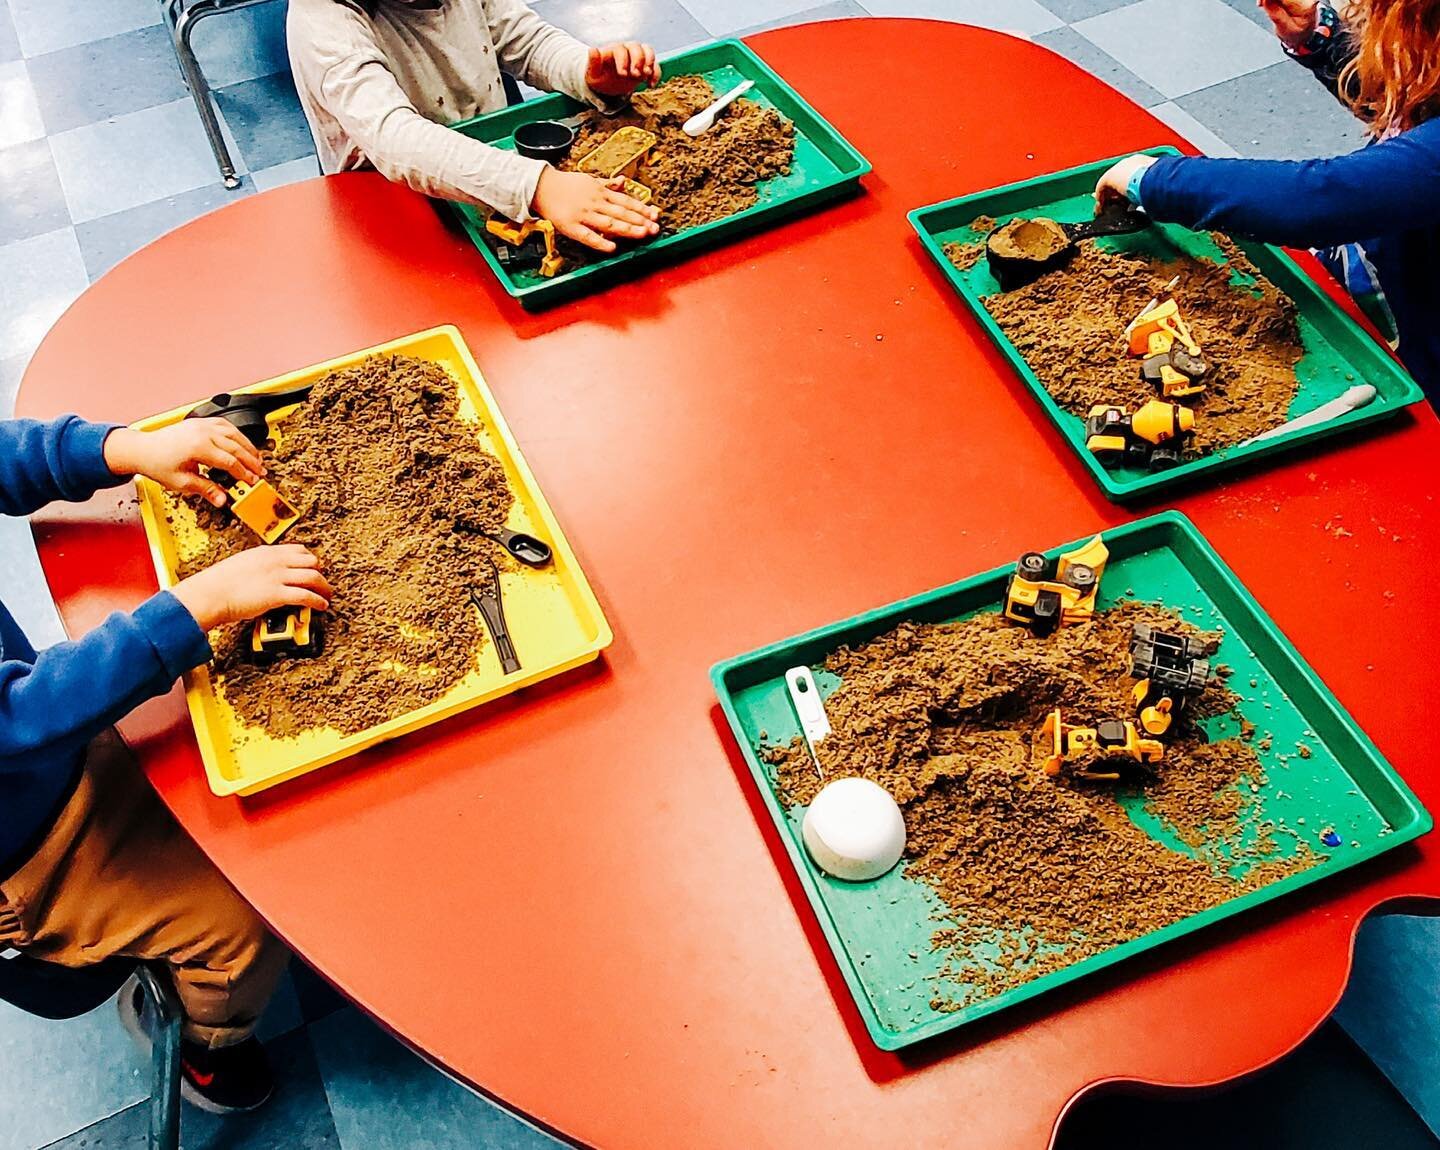 Outside in! We&rsquo;re exploring construction equipment dirt movers indoors with some sand and little trucks.

Image Description: Three students sit at a red table with green and yellow trays. The trays are filled with sand and construction equipmen